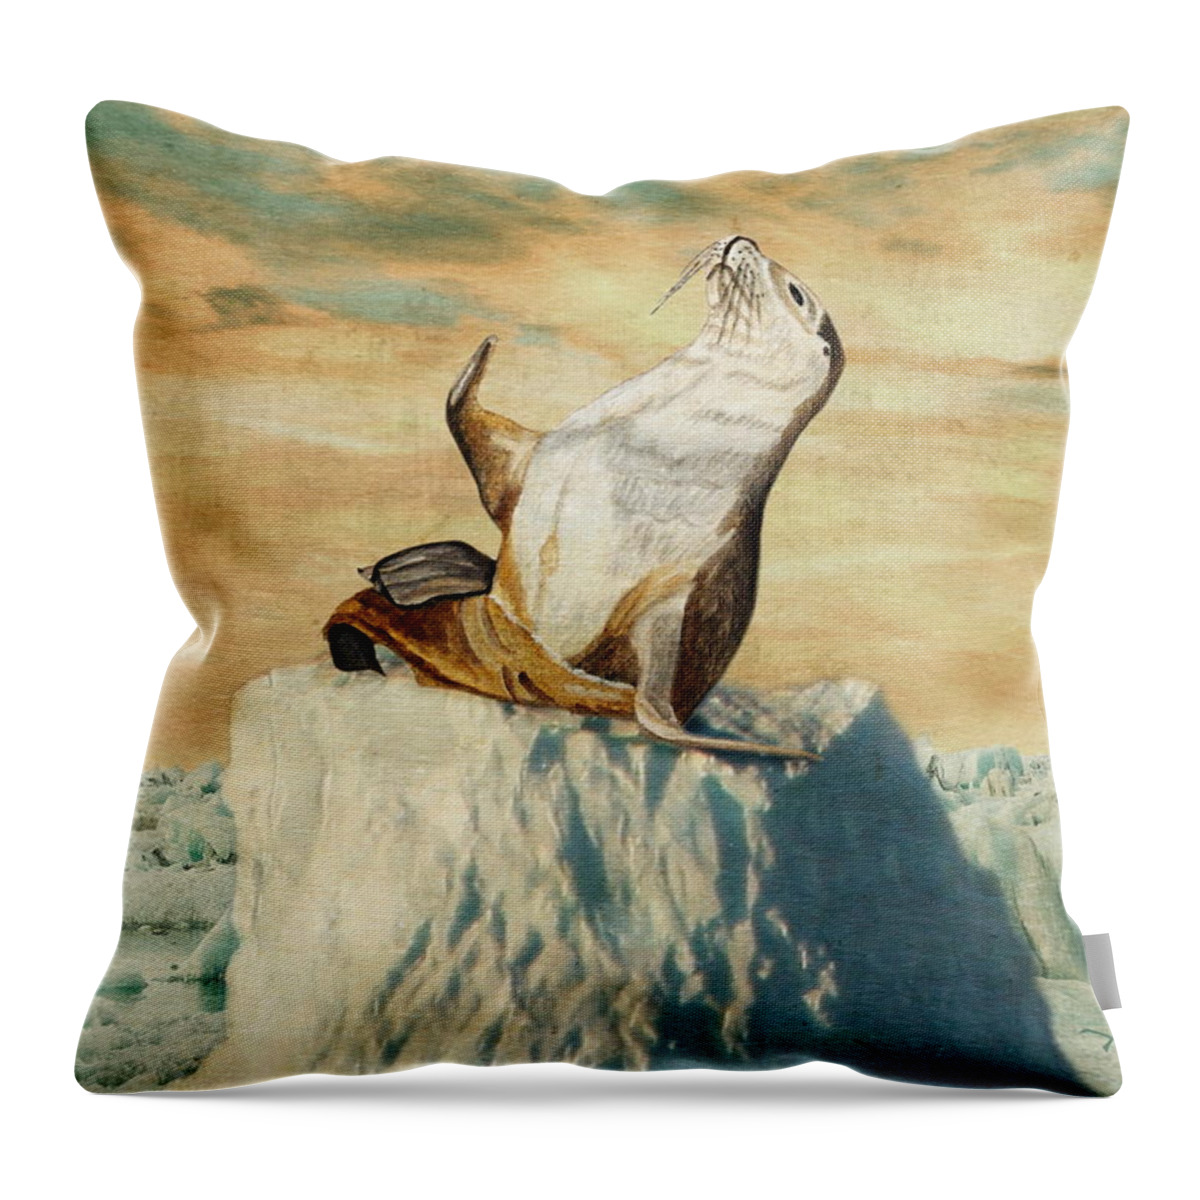 Sea Lion Throw Pillow featuring the painting Greetings From The Arctic by Angeles M Pomata